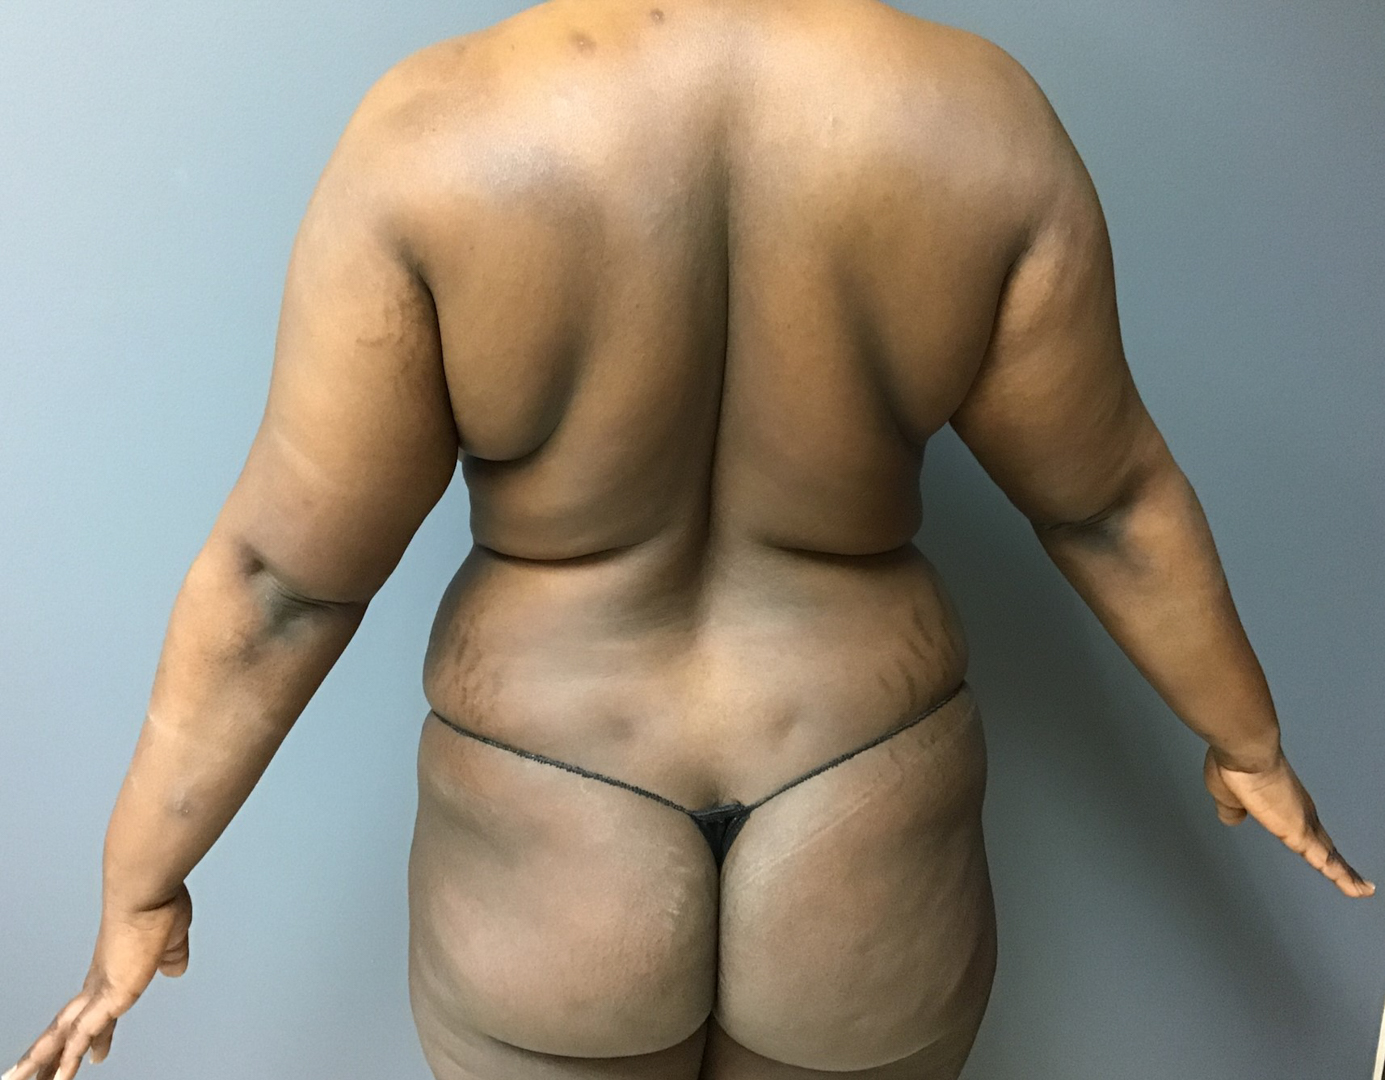 32 year old female before Vaser liposuction of the back